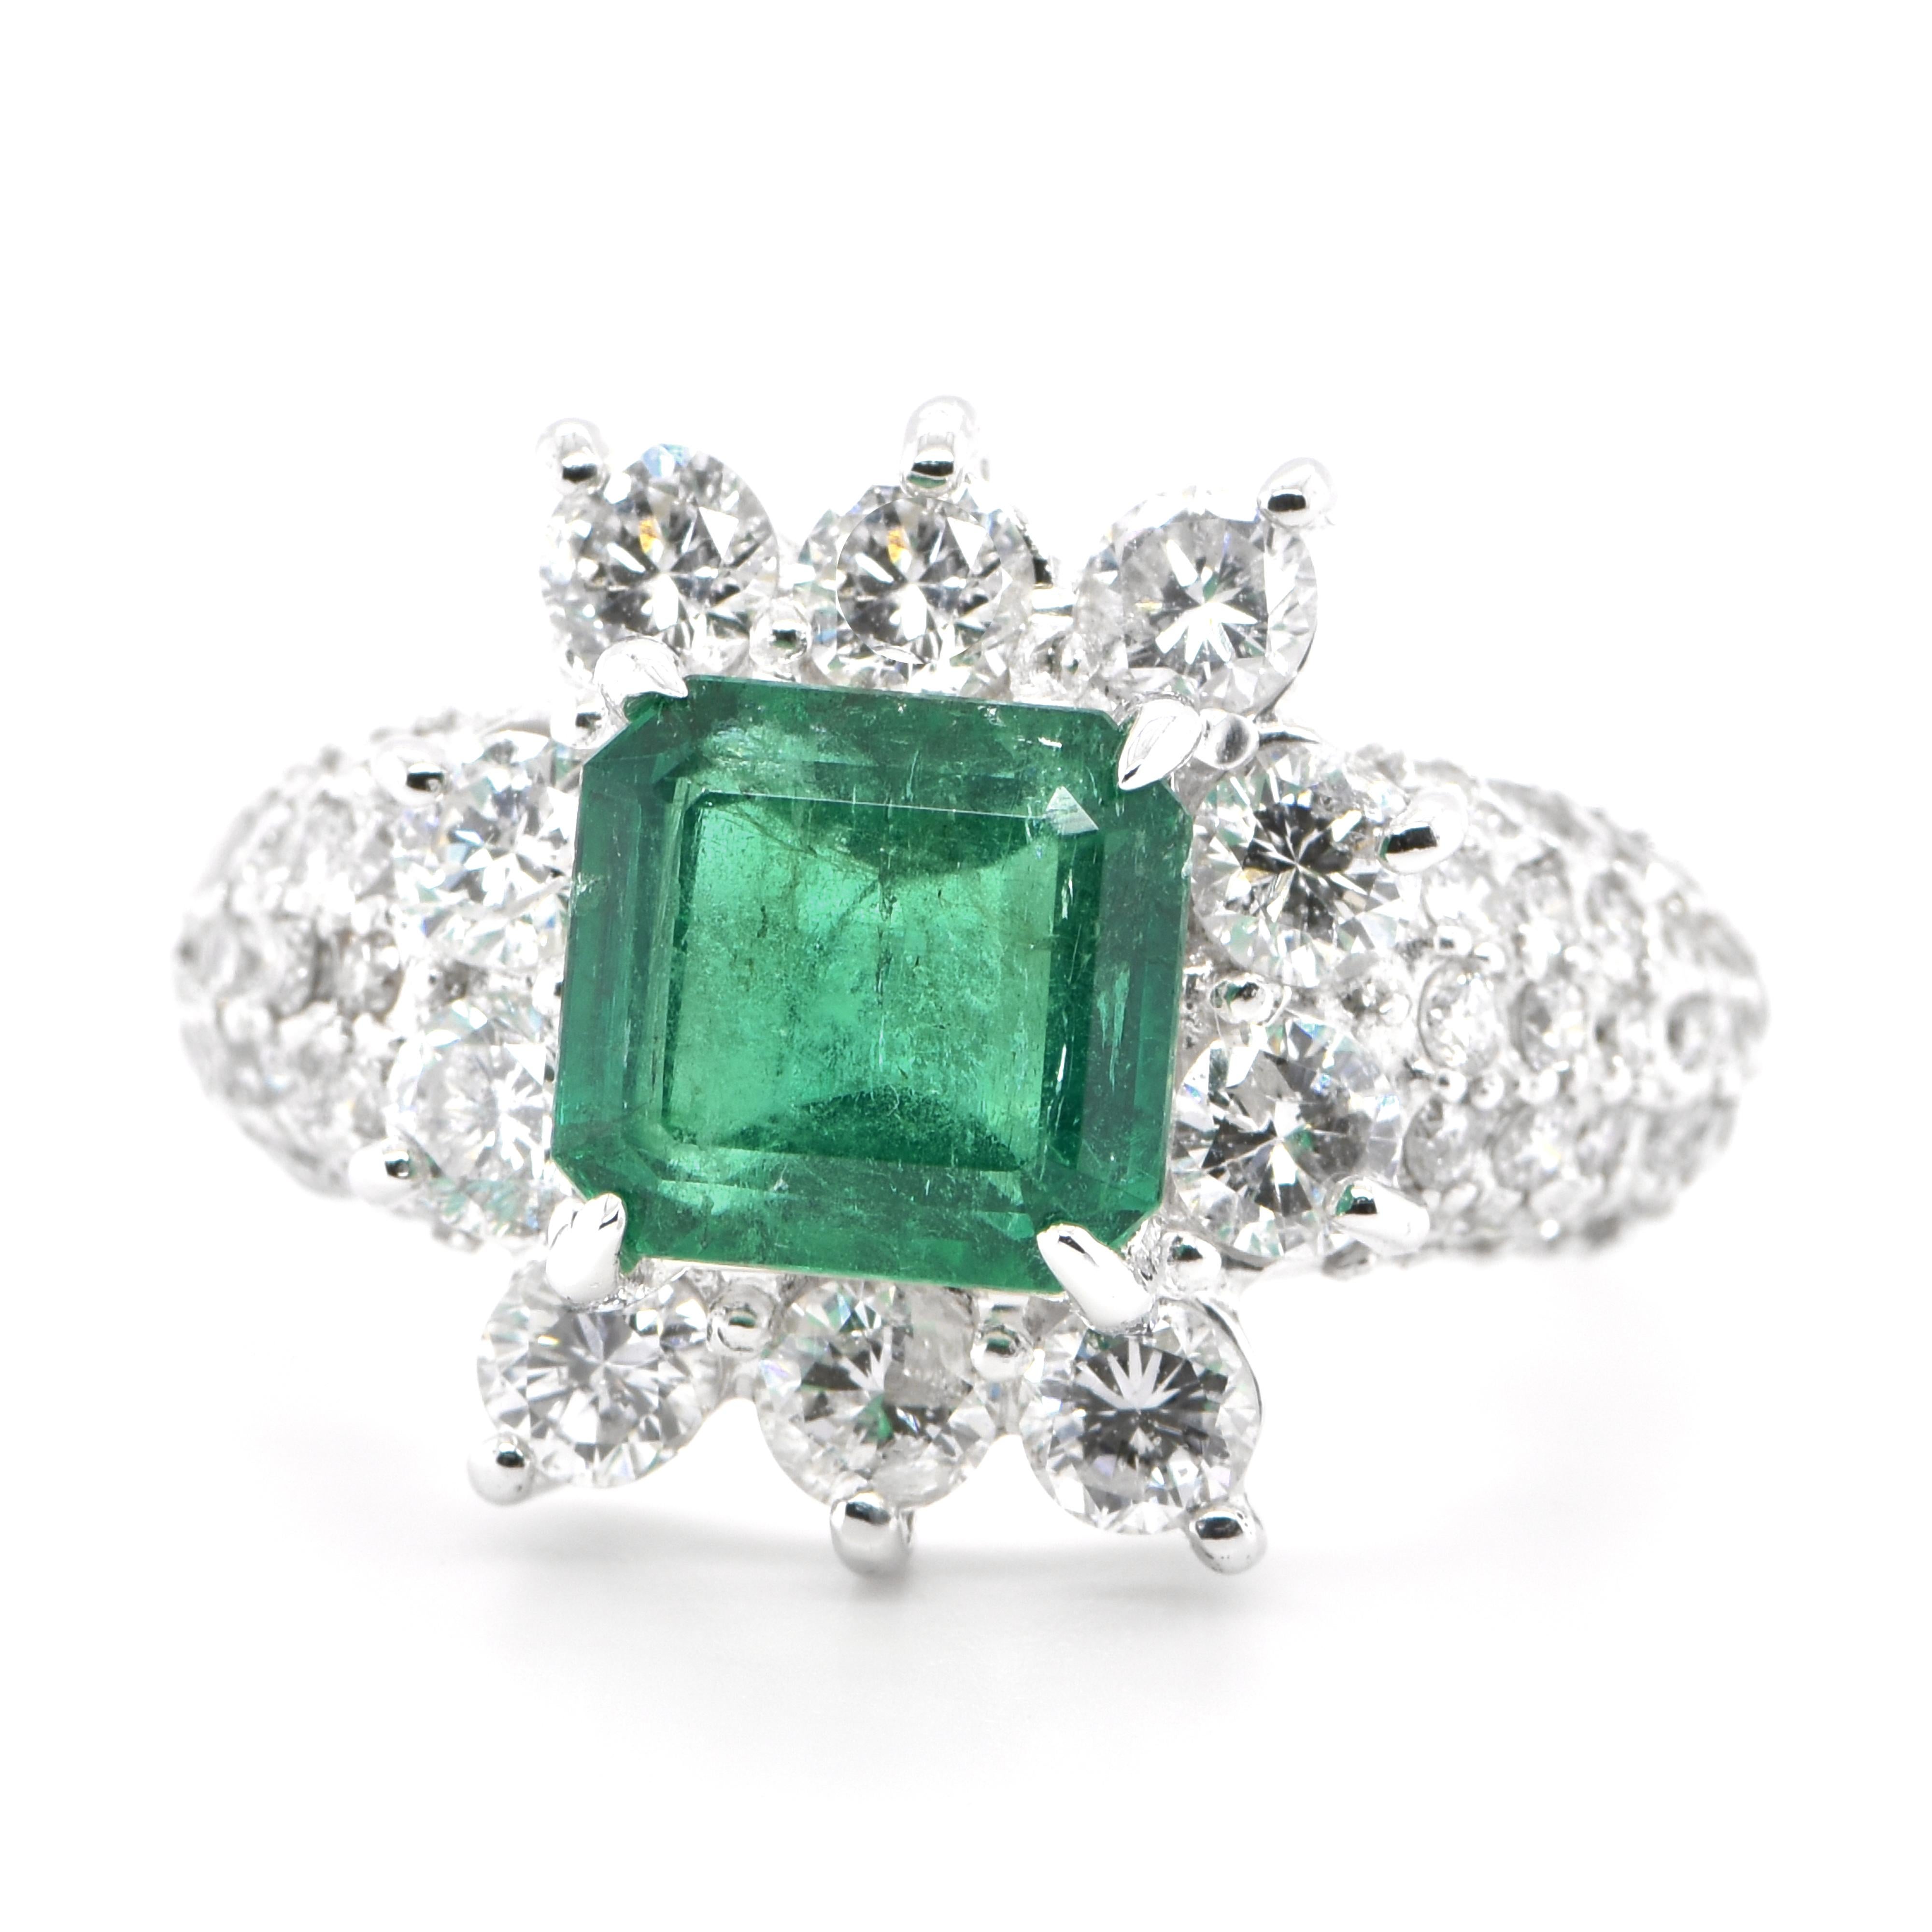 A stunning ring featuring a 2.63 Carat Natural Emerald and 2.07 Carats of Diamond Accents set in Platinum. People have admired emerald’s green for thousands of years. Emeralds have always been associated with the lushest landscapes and the richest